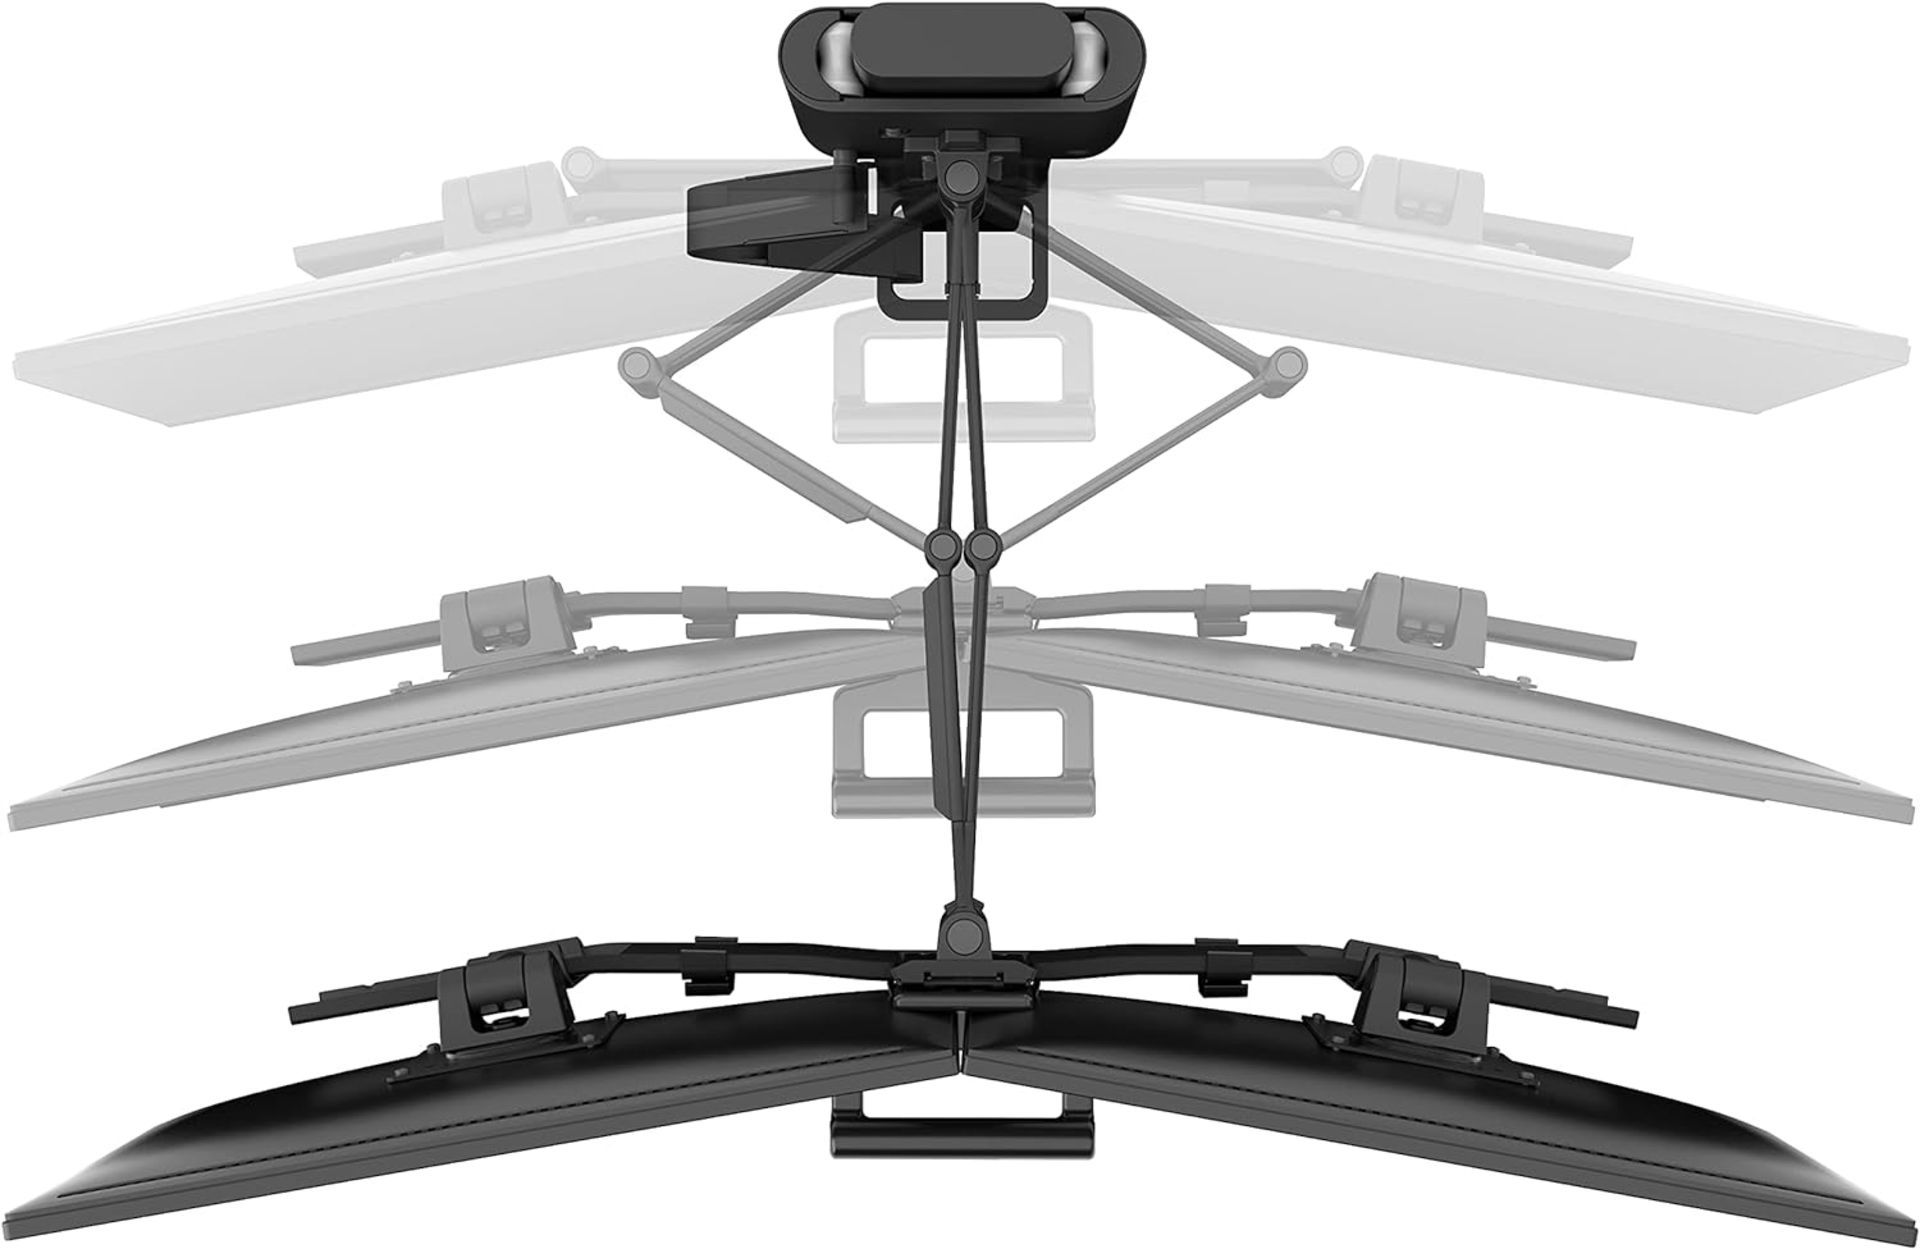 NEW & BOXED ERGOTRON Trace Dual Monitor Arm, VESA Desk Mount. RRP £417. (PCK5). for 2 Monitors Up to - Image 6 of 8